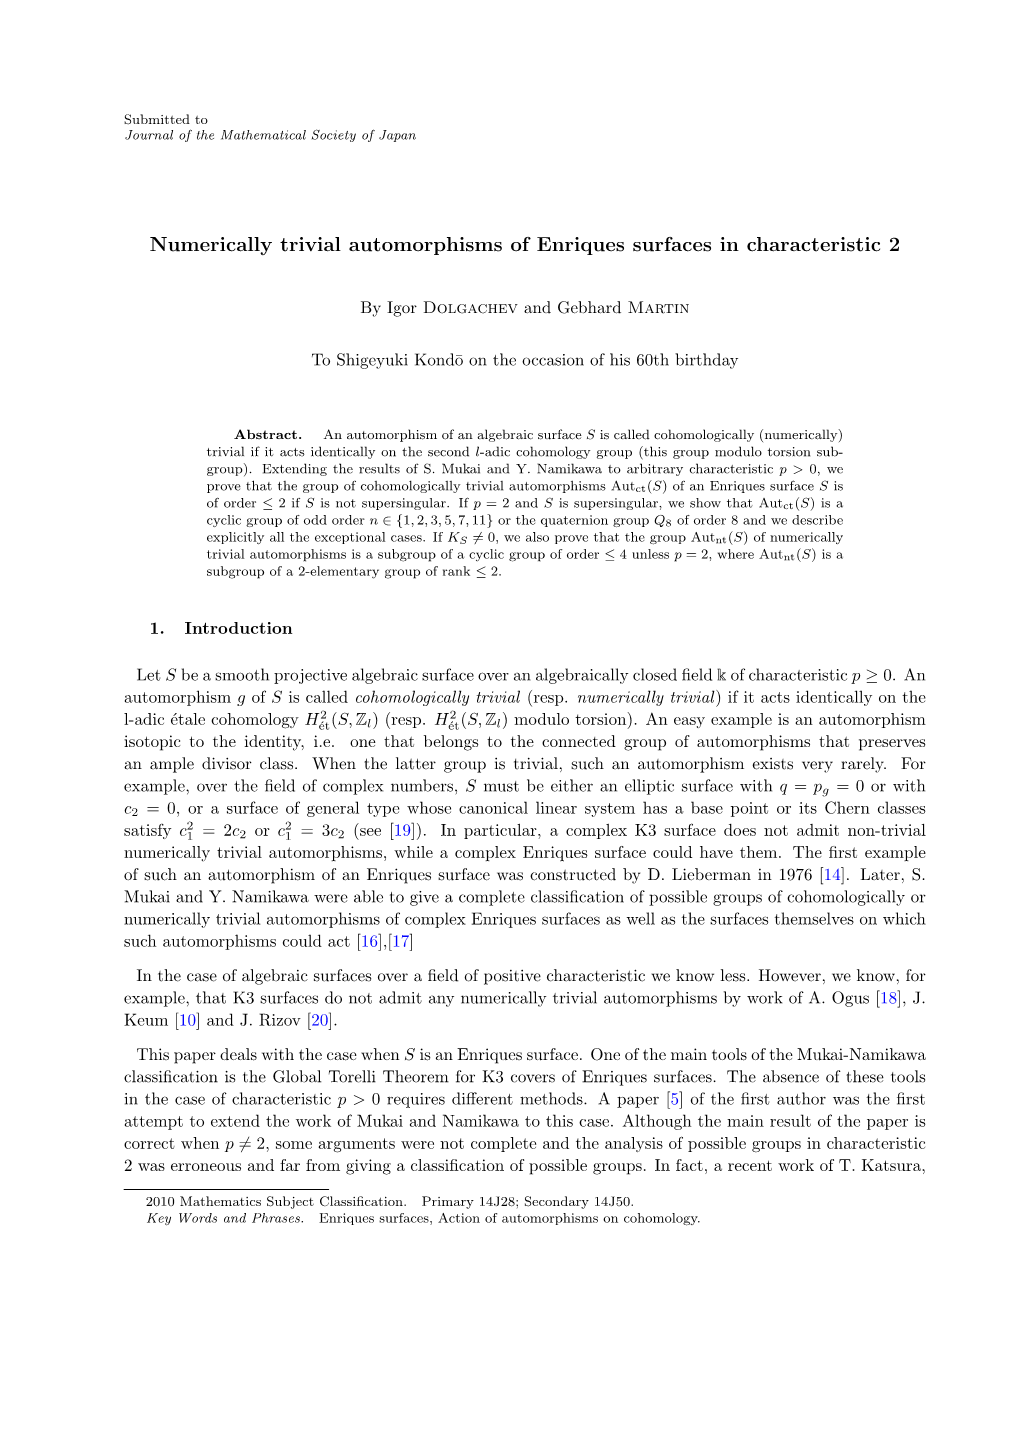 Numerically Trivial Automorphisms of Enriques Surfaces in Characteristic 2